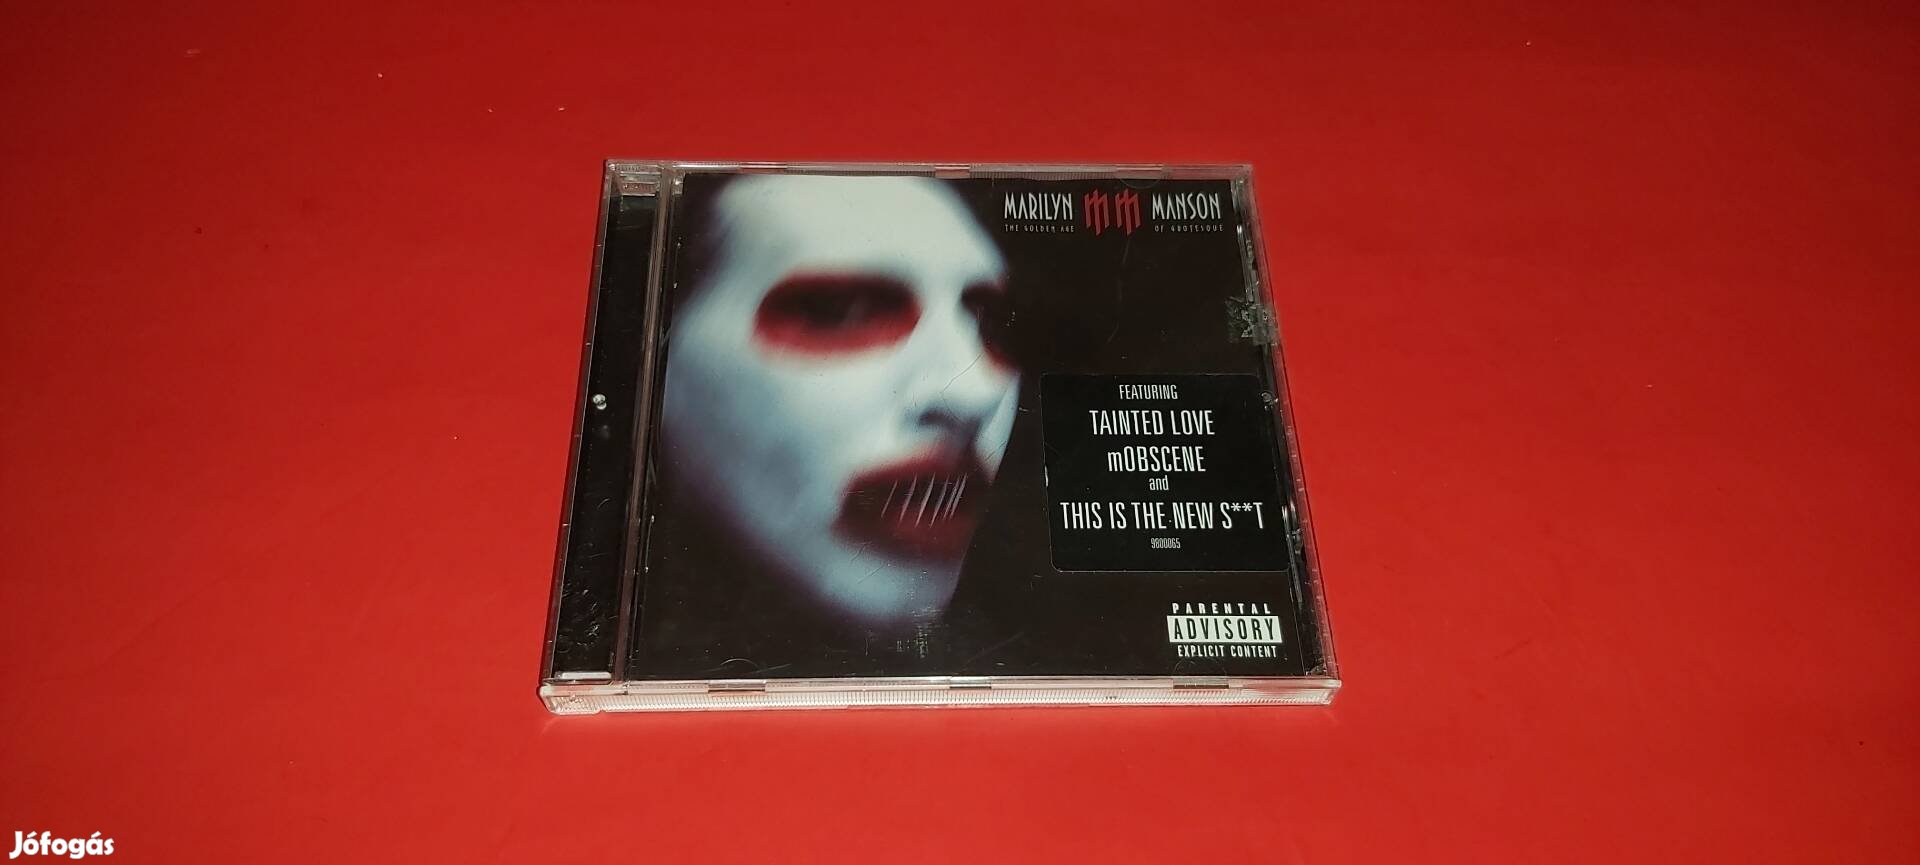 Marilyn Manson The golden age of grotesque Cd 2003